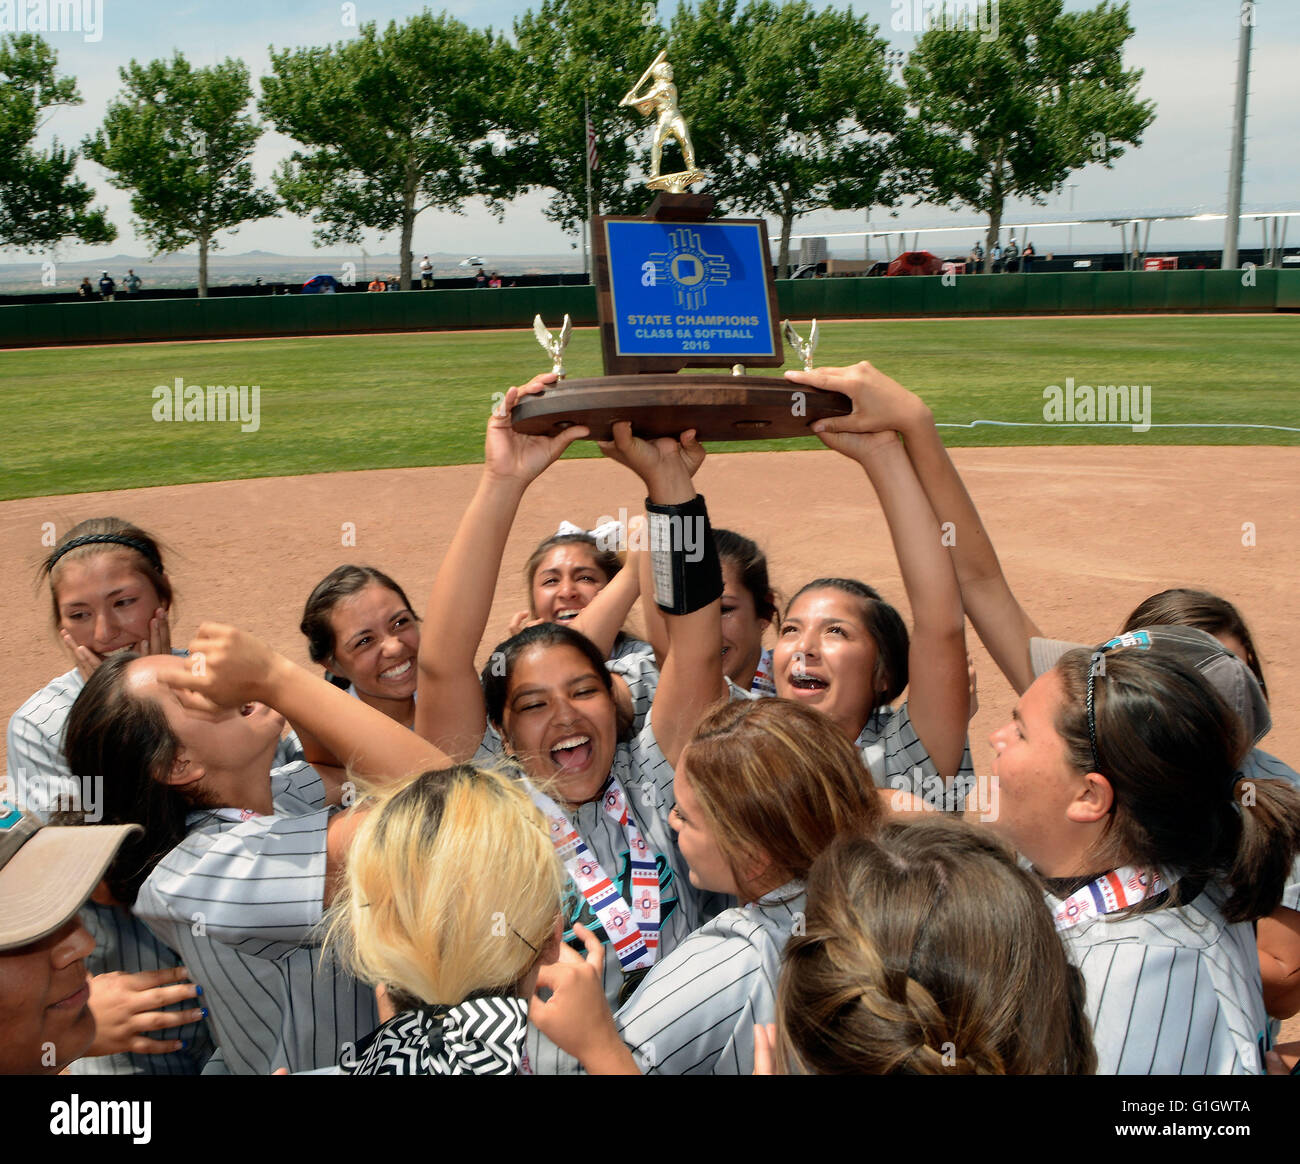 Albuquerque, NM, USA. 14th May, 2016. The members of the O''“ate softball team raise the championship trophy into the air after beating Cleveland for the 6A Girls Softball Championship. Saturday, May 14, 2016. © Jim Thompson/Albuquerque Journal/ZUMA Wire/Alamy Live News Stock Photo